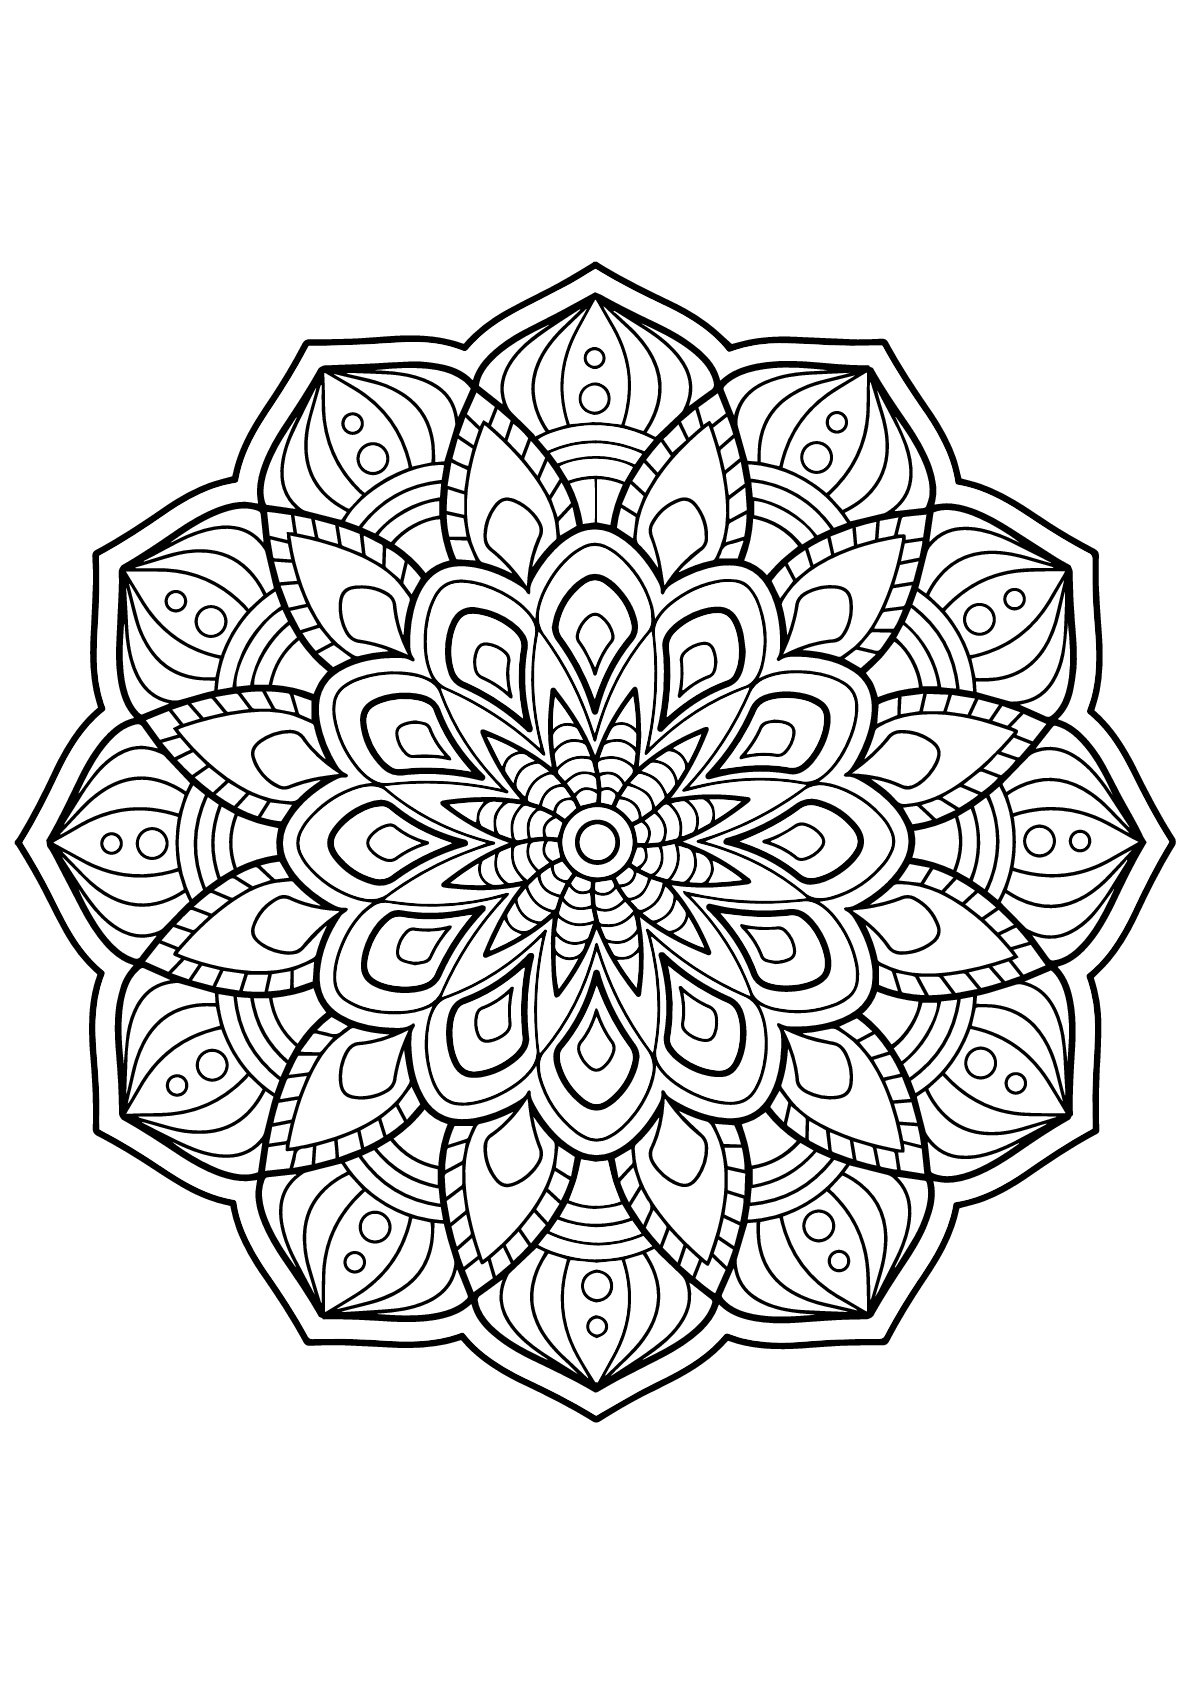 Mandala full of beautiful details from Free Coloring book for adults